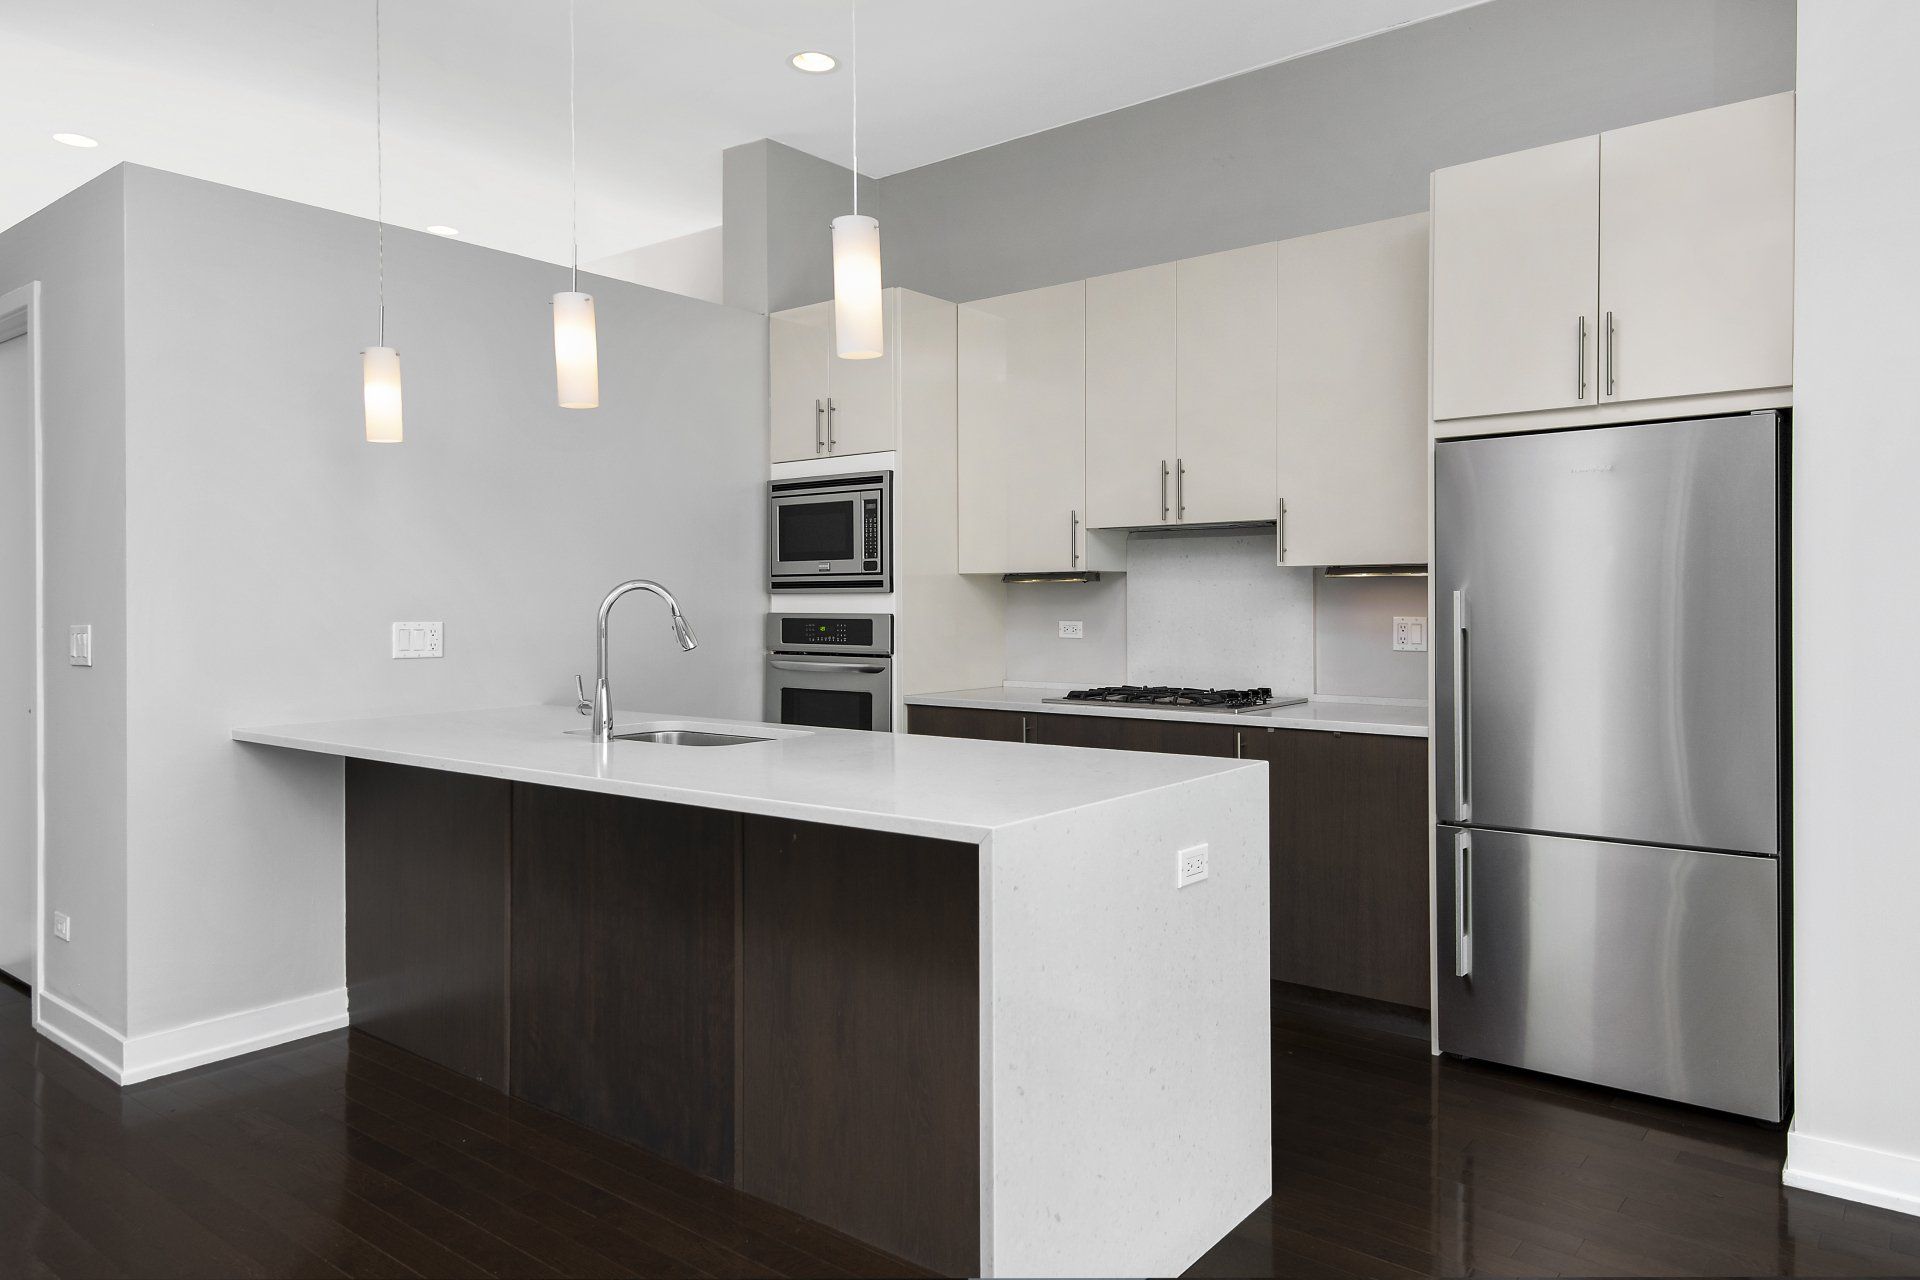 Apartment kitchen with stainless steel appliances and white cabinets at 1846 W Division Street.